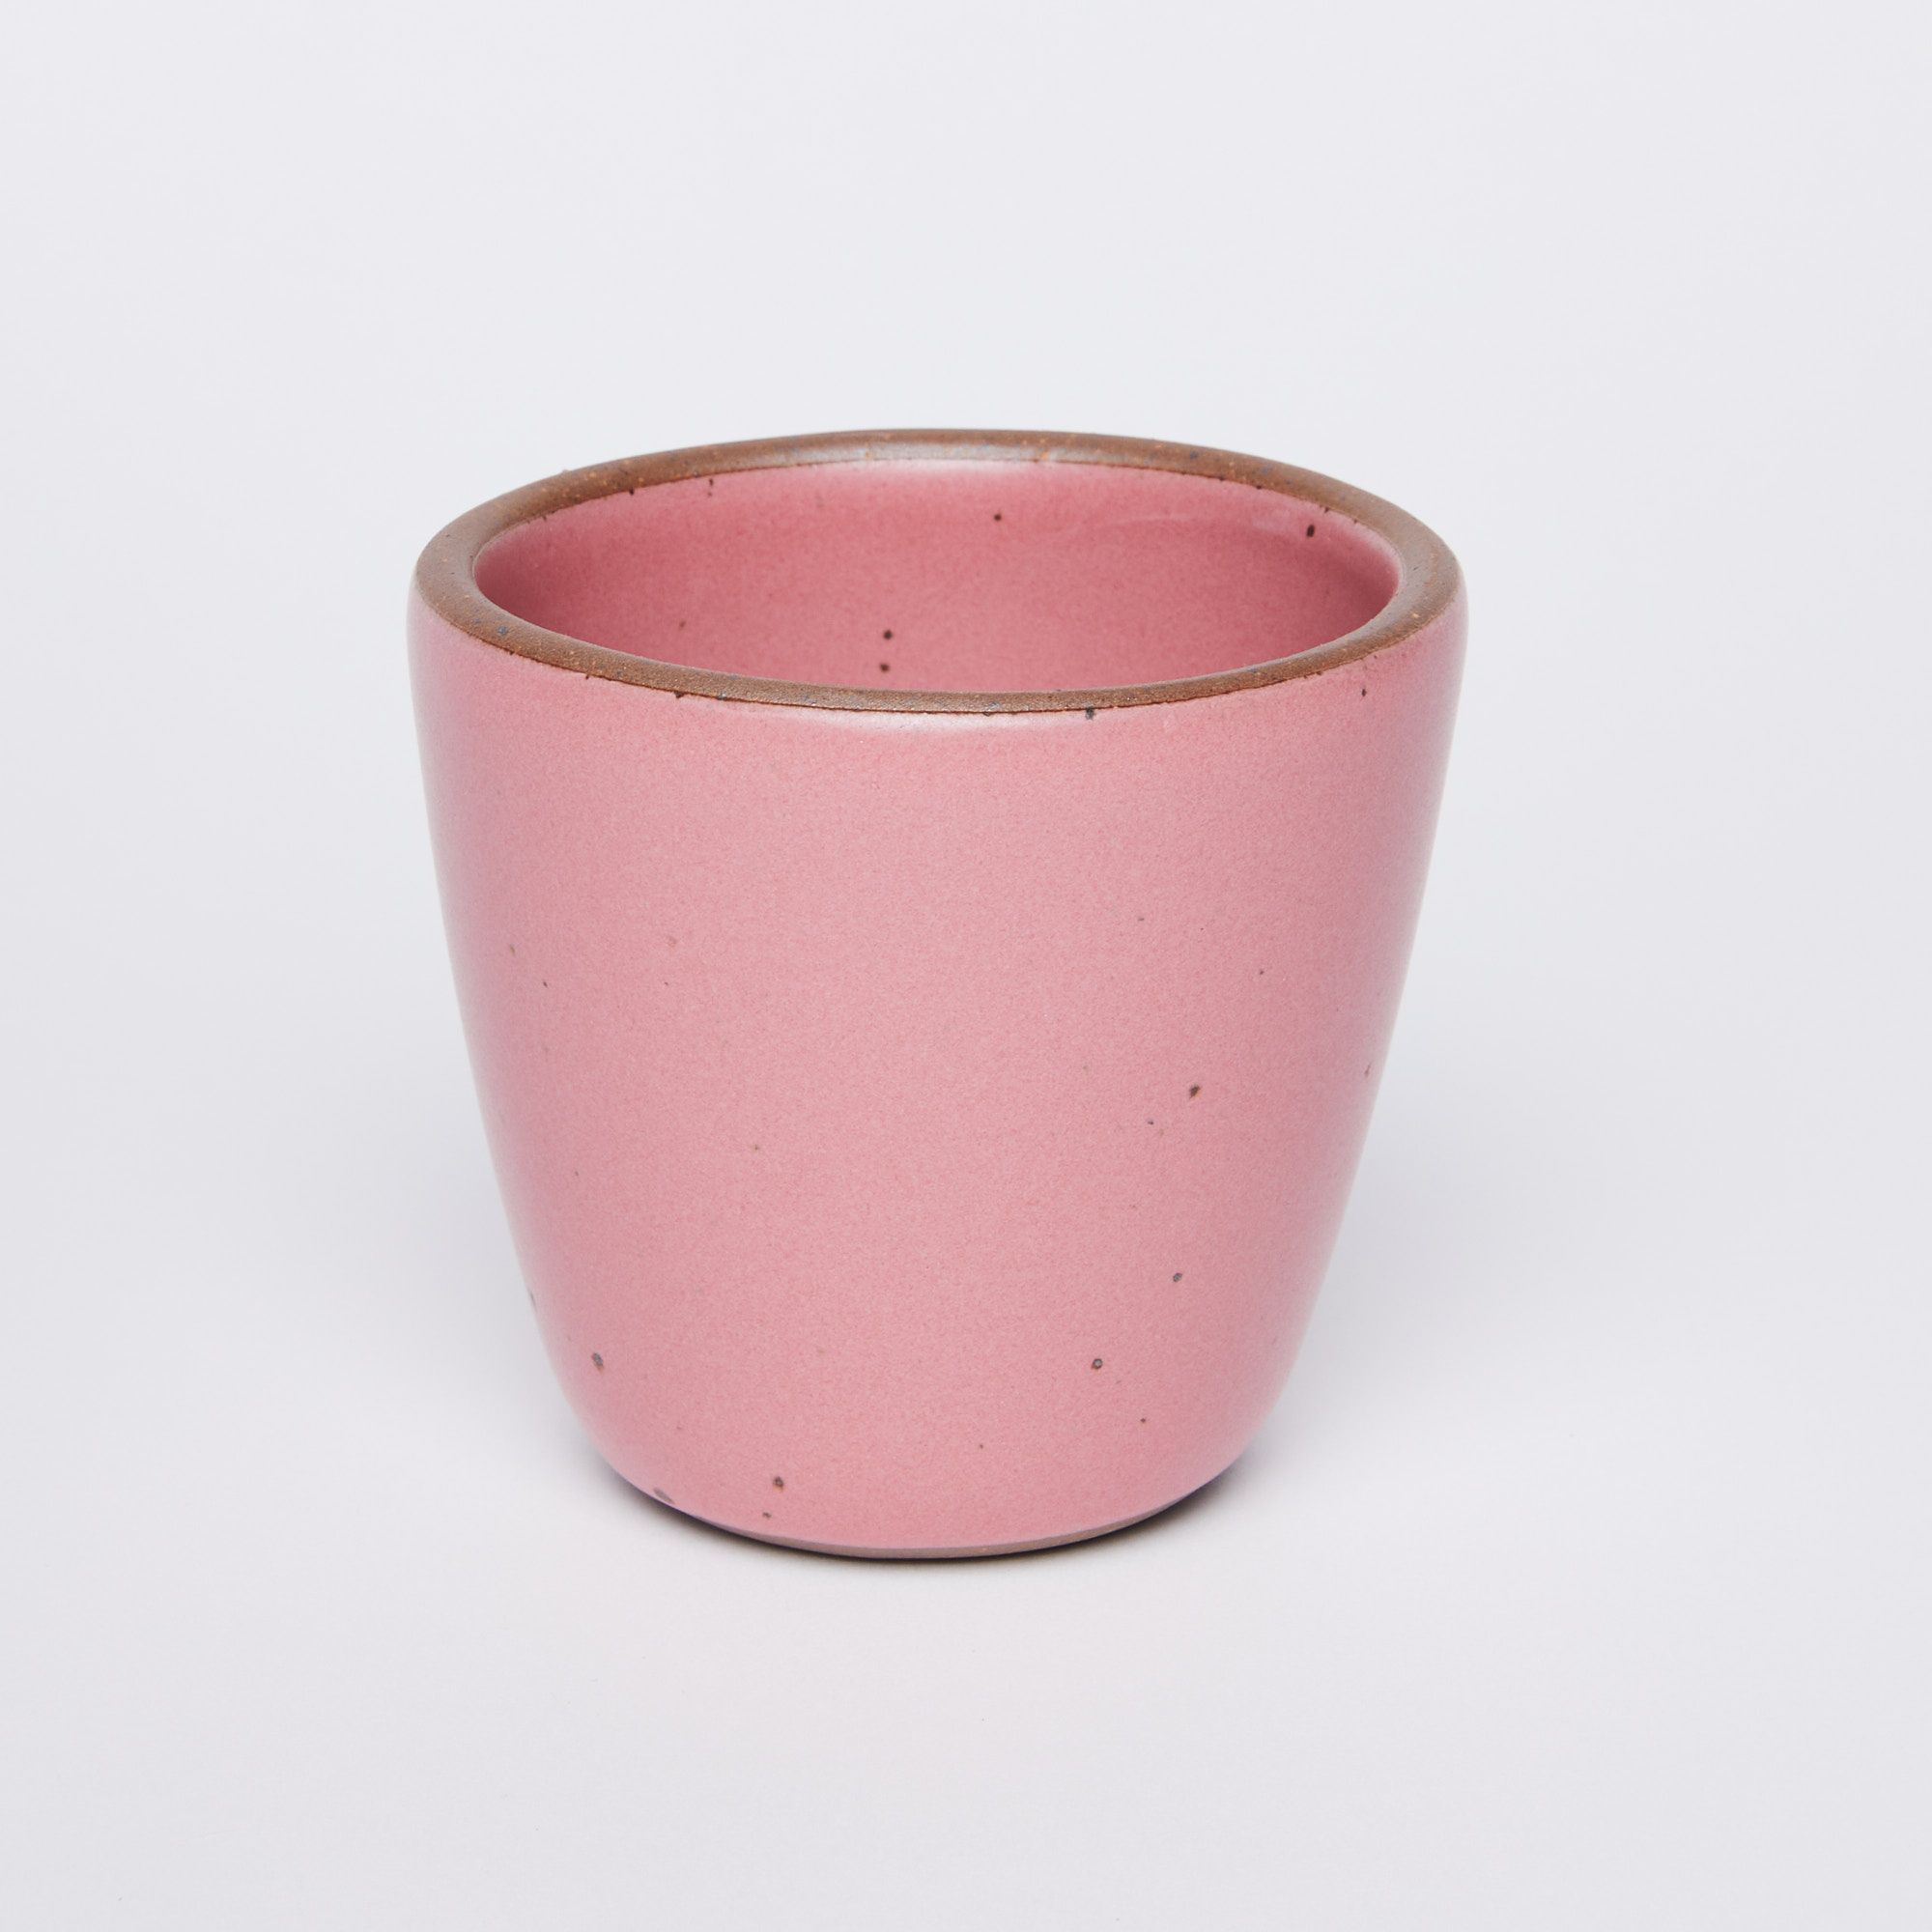 short cup that tapers out to get wider at the top in Rococo (pink) glaze